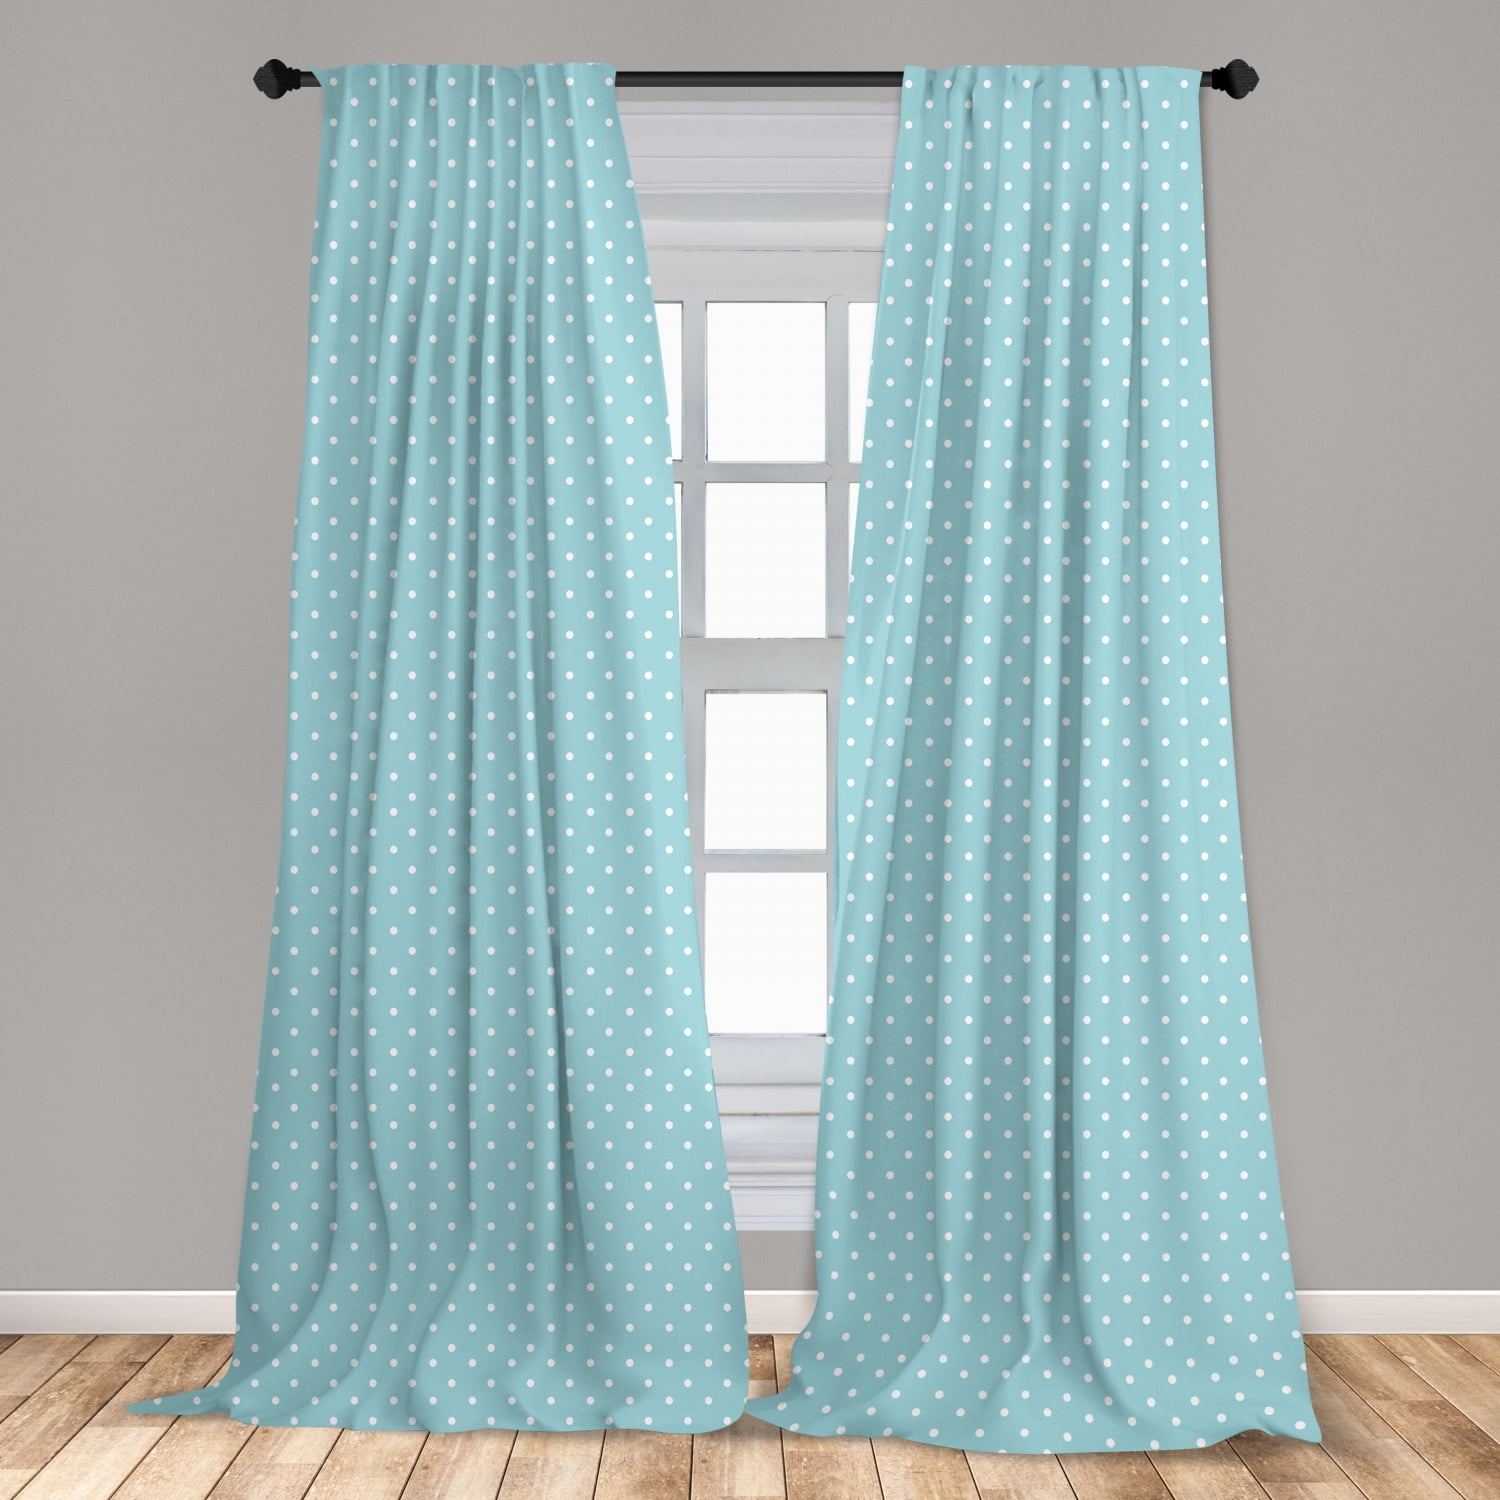 Lime Green Turquoise Polka-Dot fabric window decor treatment topper curtain Valance 13 by 42 